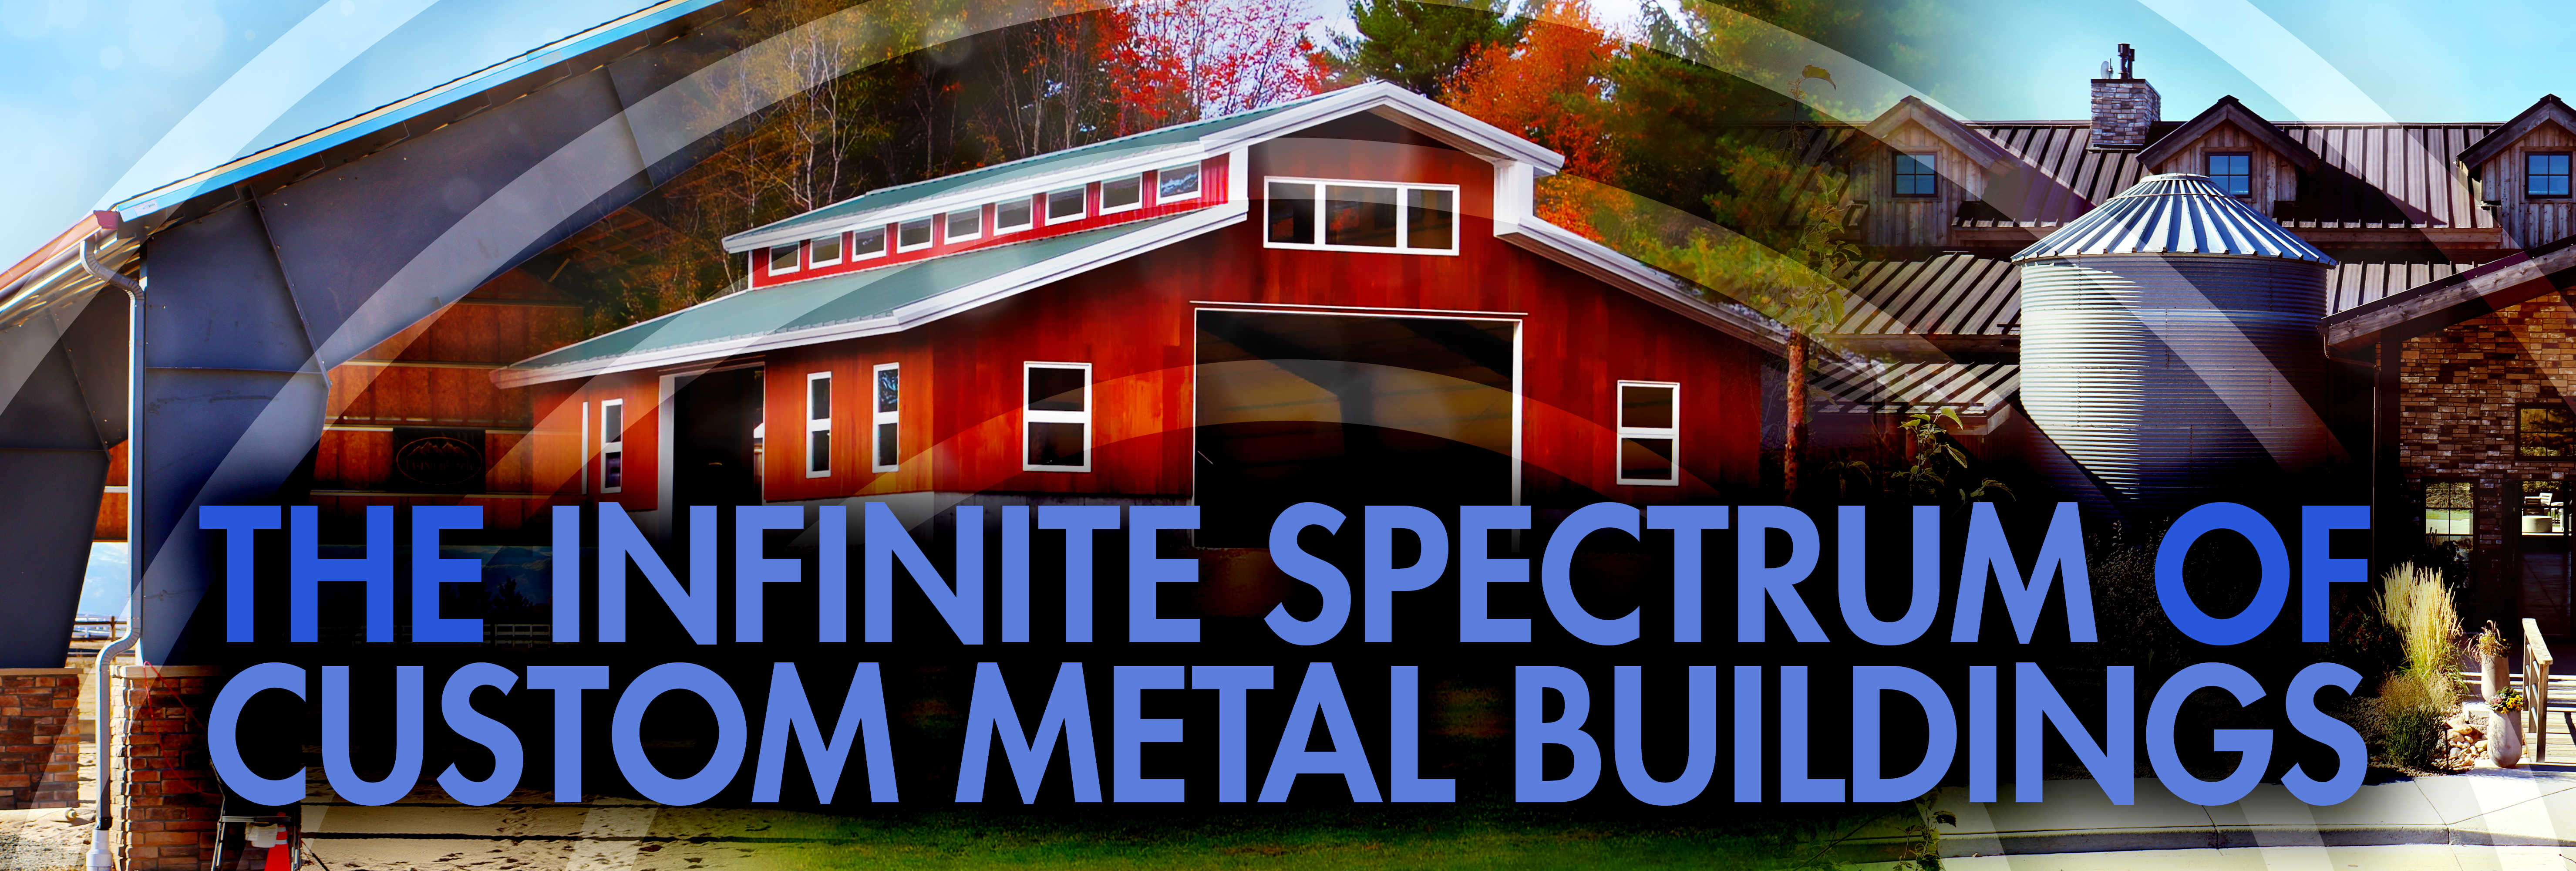 Introducing The World of Custom Metal Buildings and Their Endless Possibilities